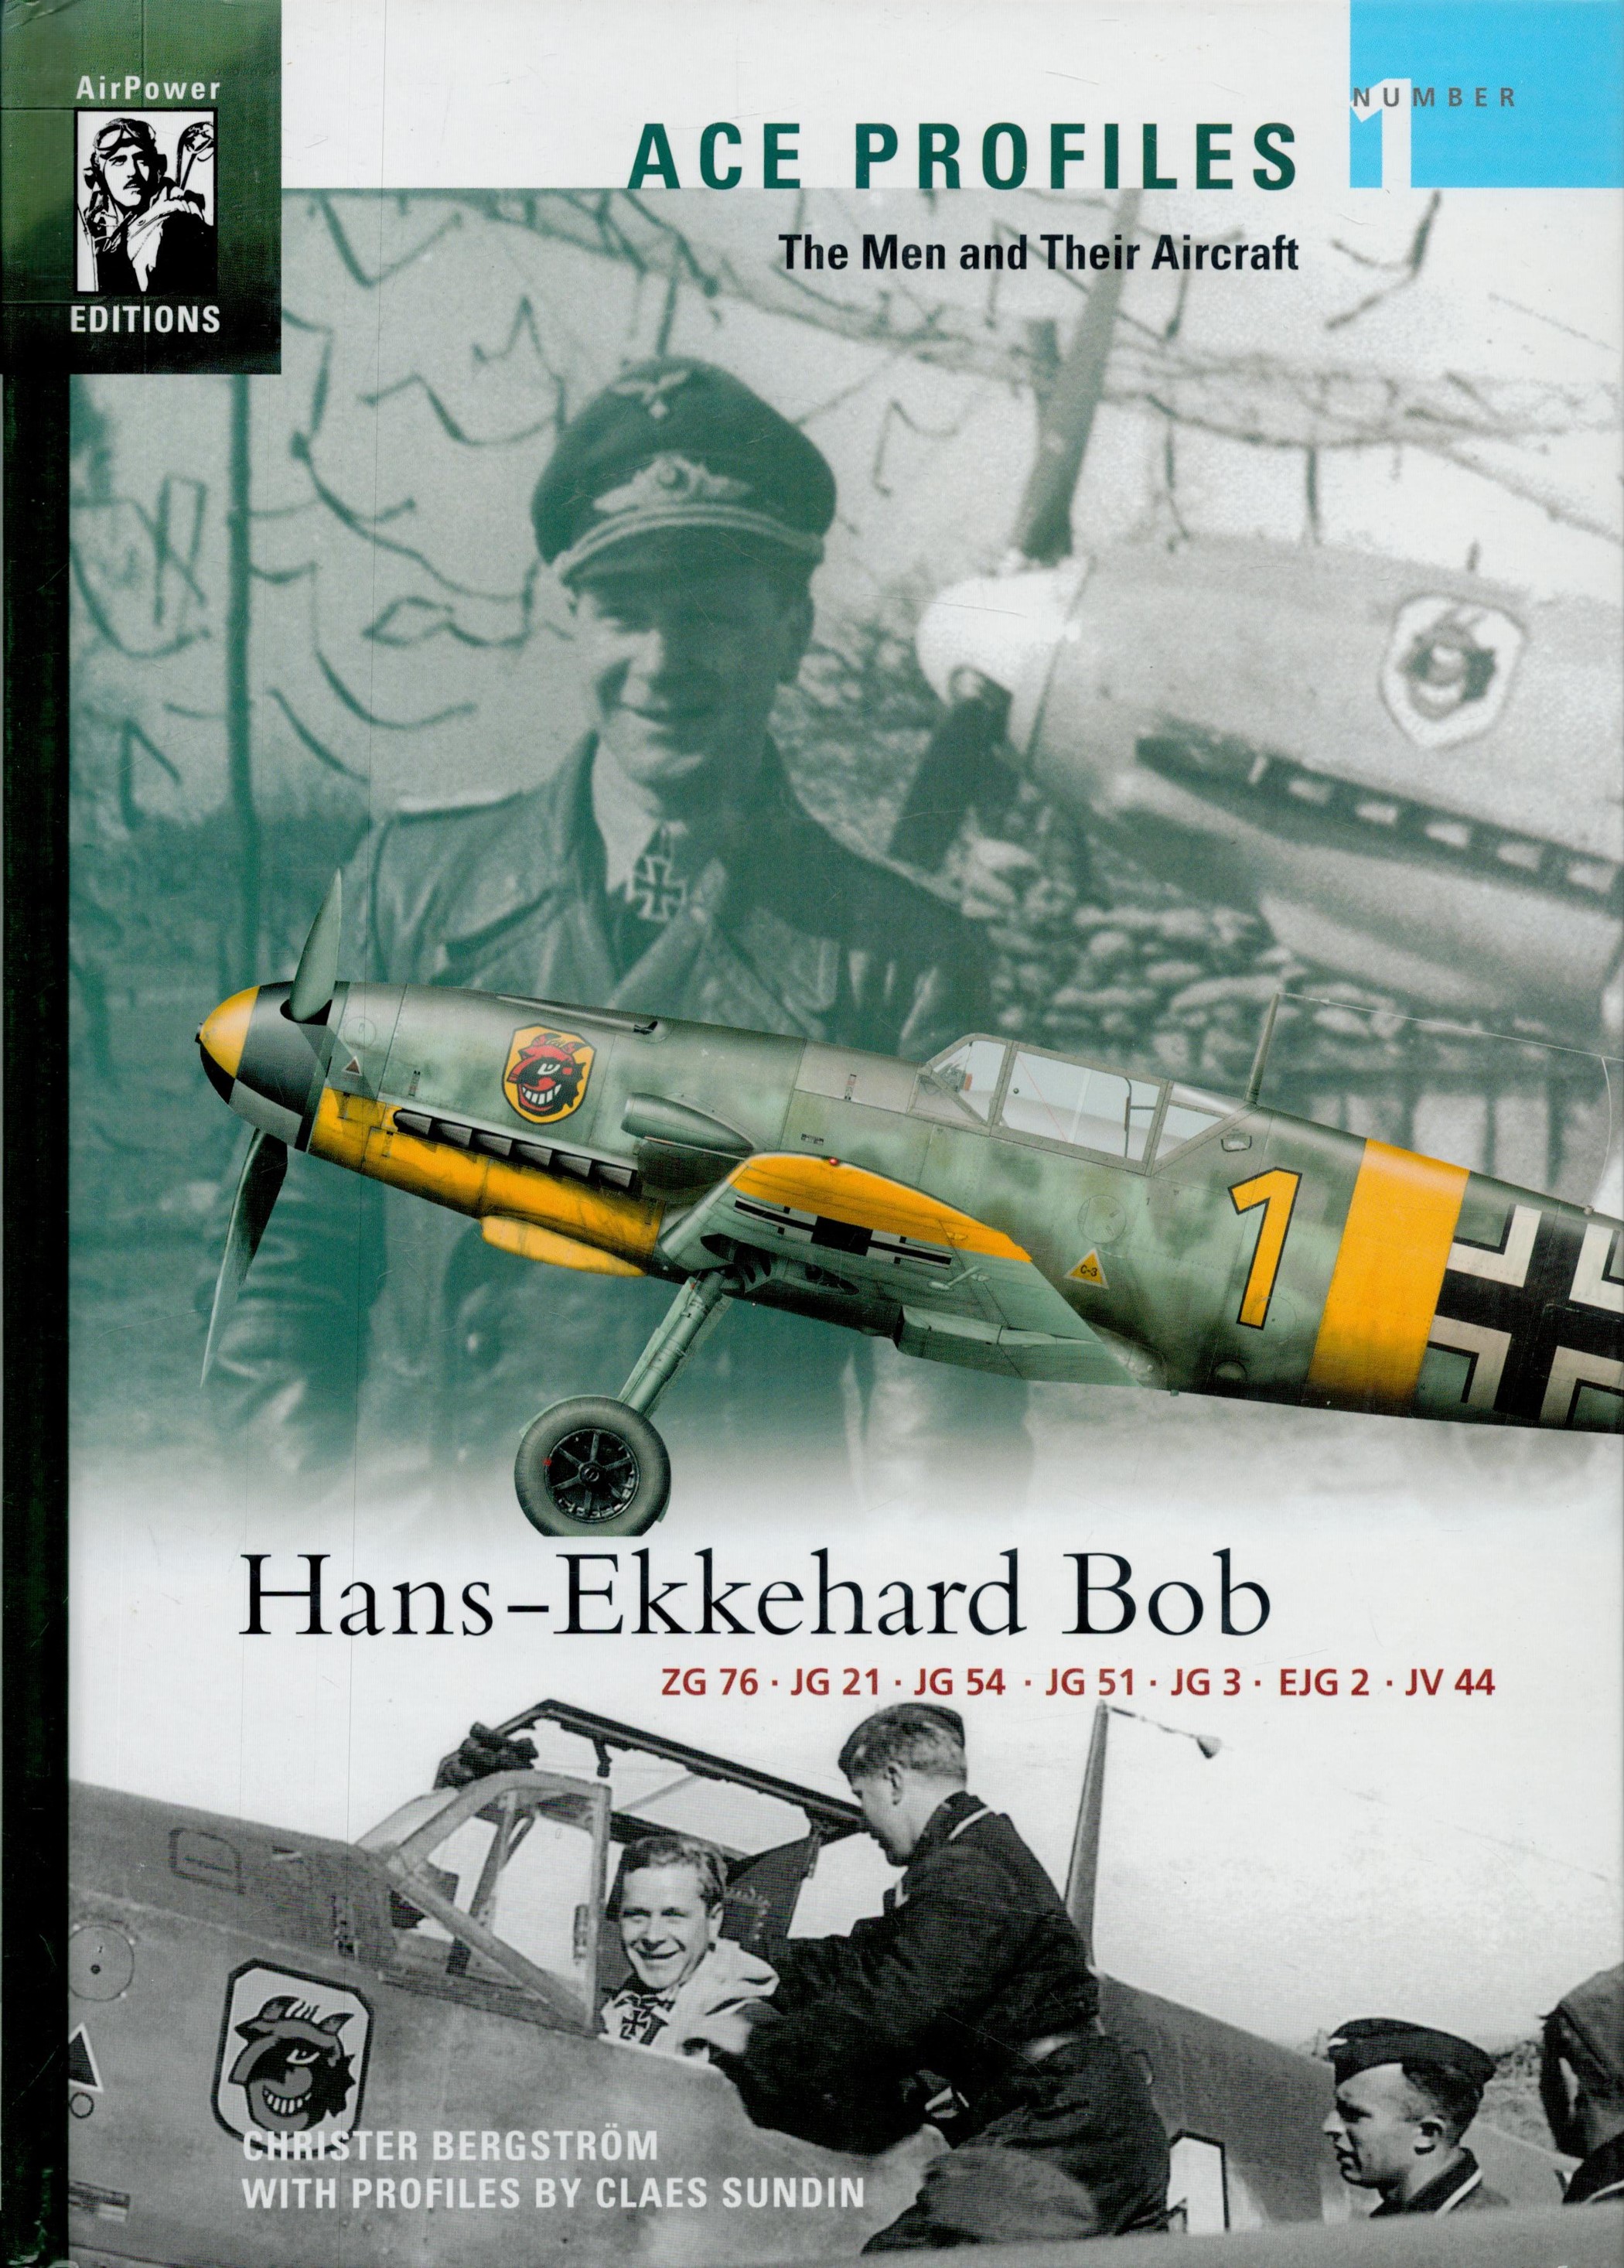 Hans-Ekkehard Bob (Ace Profiles - The Men and Their Aircraft) by Christer Bergstrom, Signed by